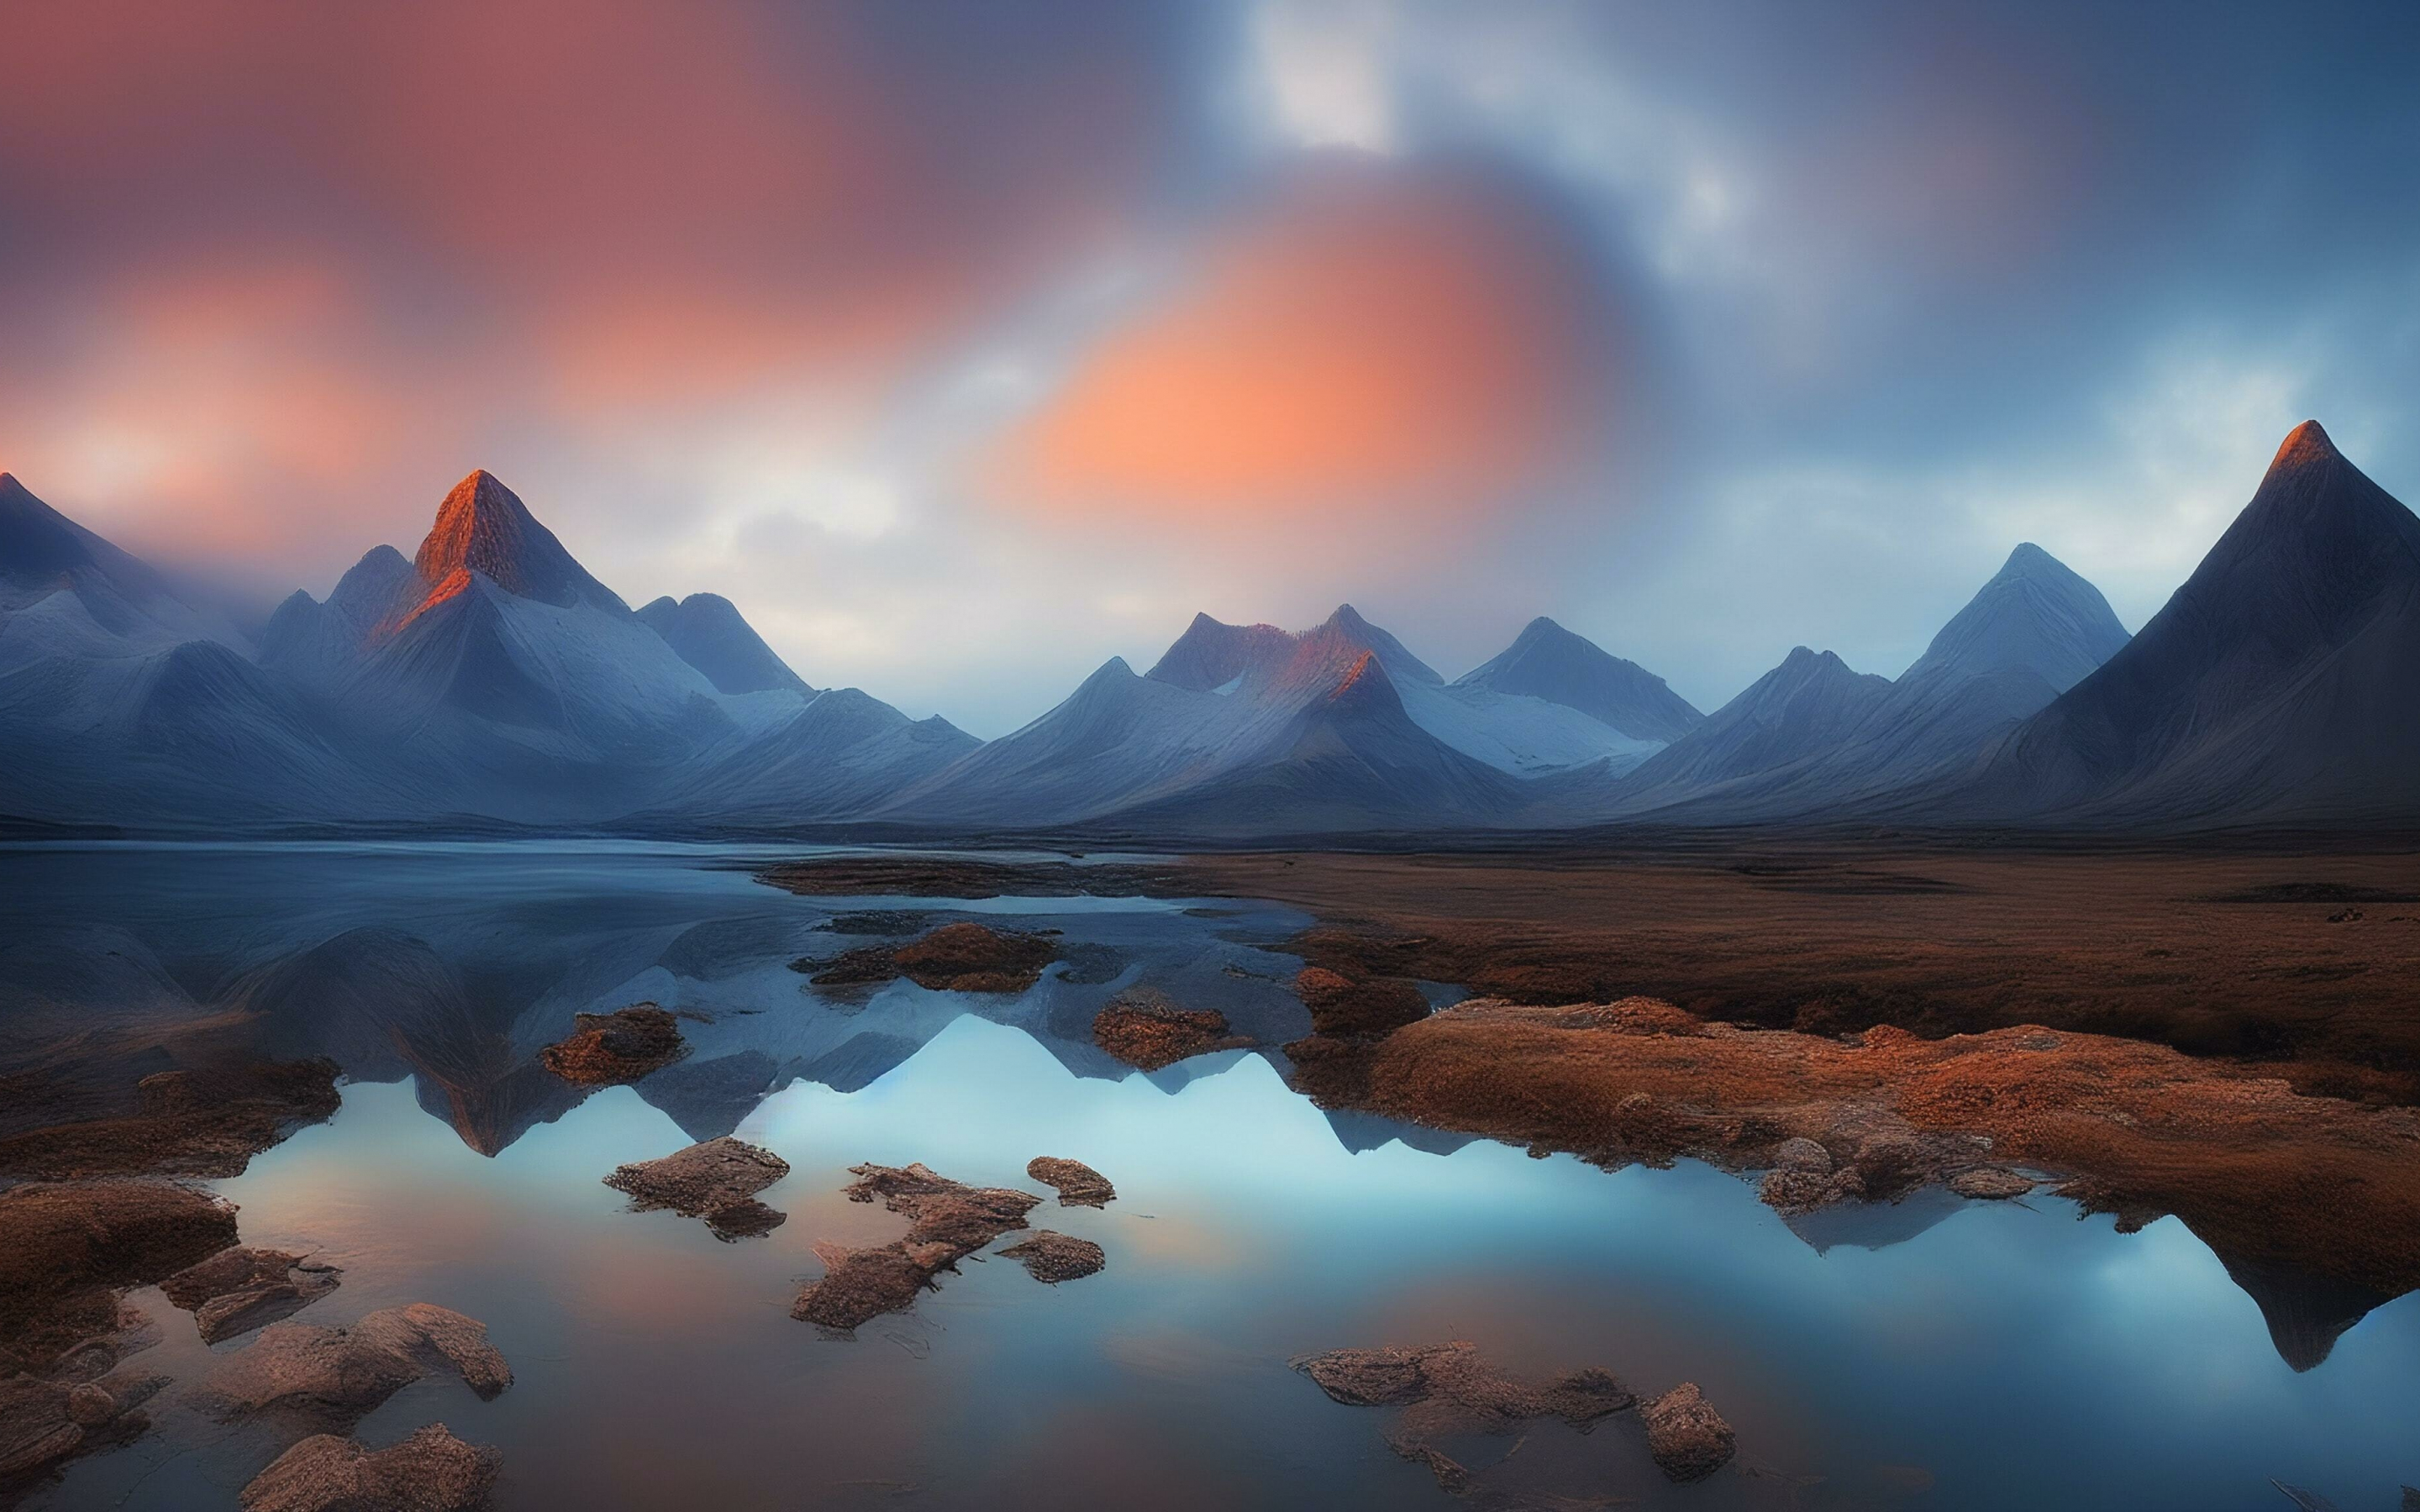 Lake and mountains, reflections, cloudy sunset, nature, 2880x1800 wallpaper